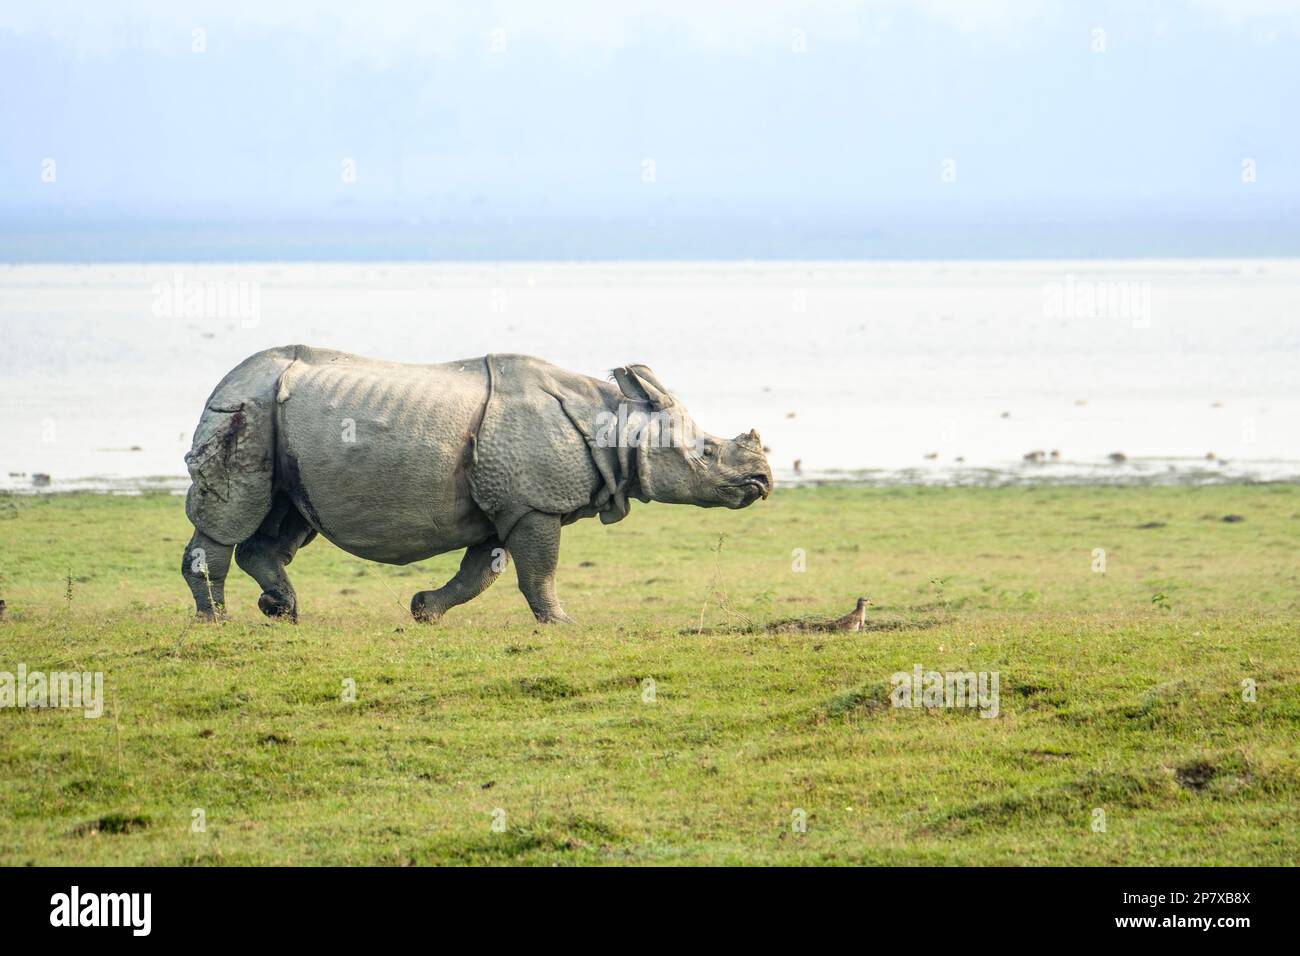 Indian Rhino, Rhinoceros unicornis, crosses from left-to-right grassland in front of a river. Kaziranga National Park, Assam, India Stock Photo